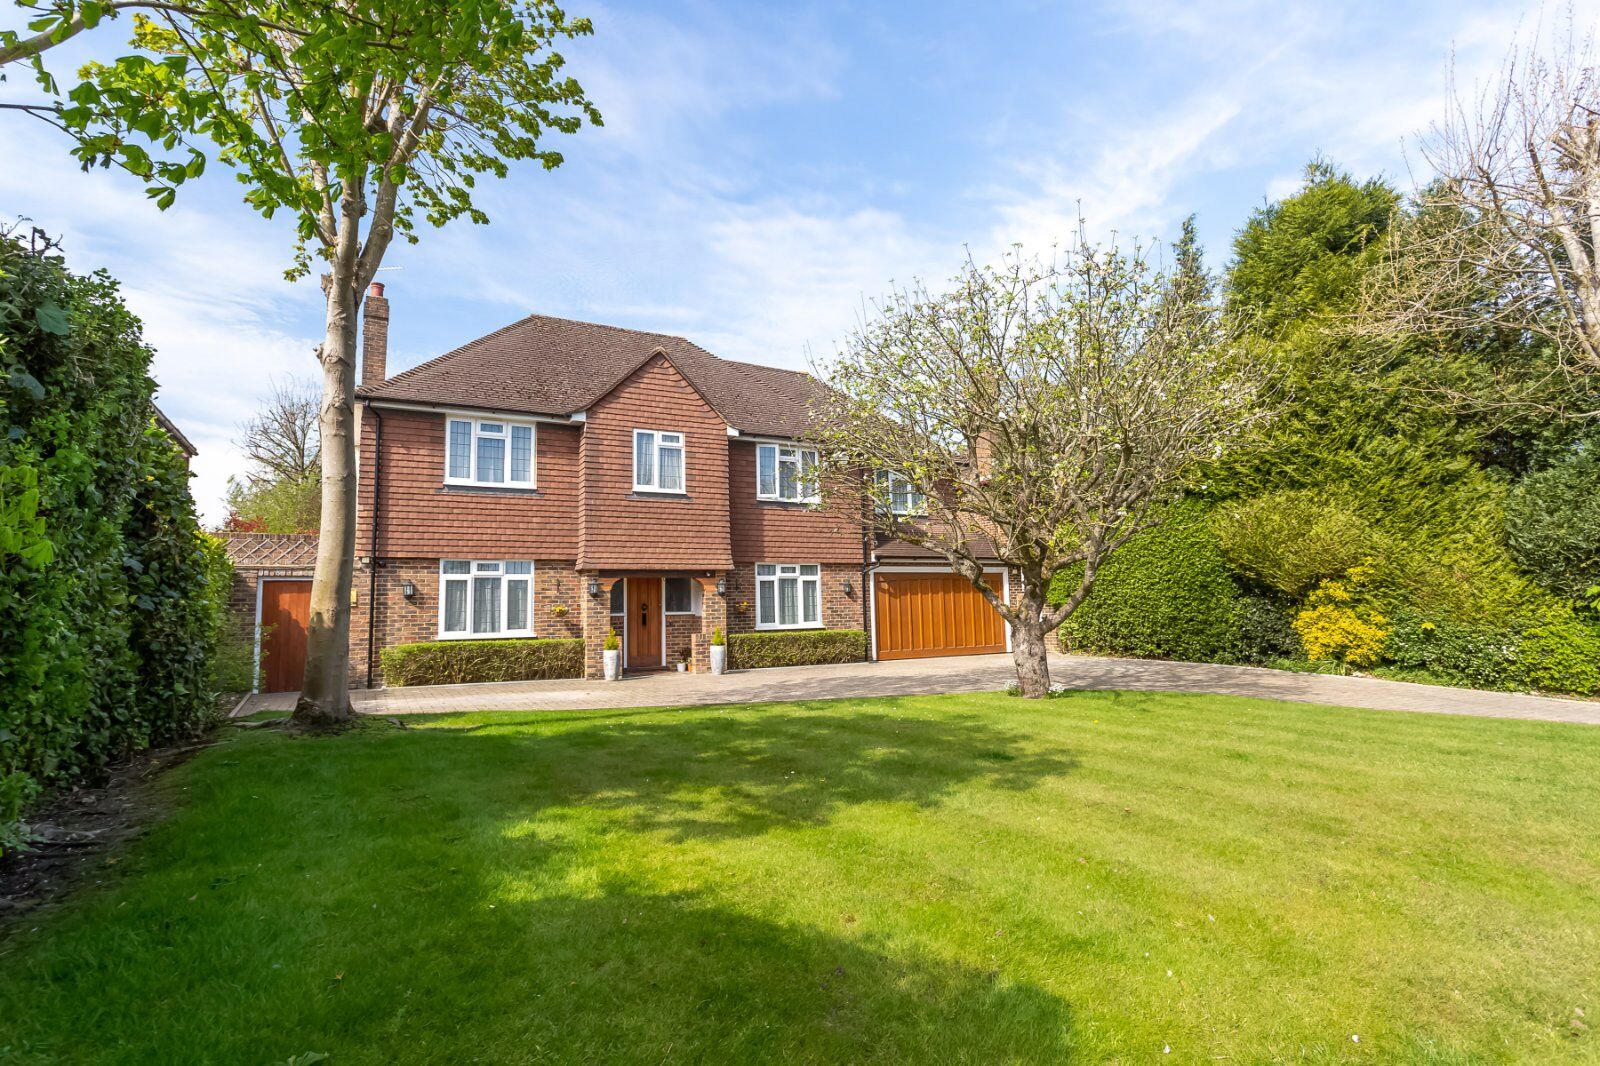 5 bedroom detached house for sale Sandy Lane, South Cheam, SM2, main image